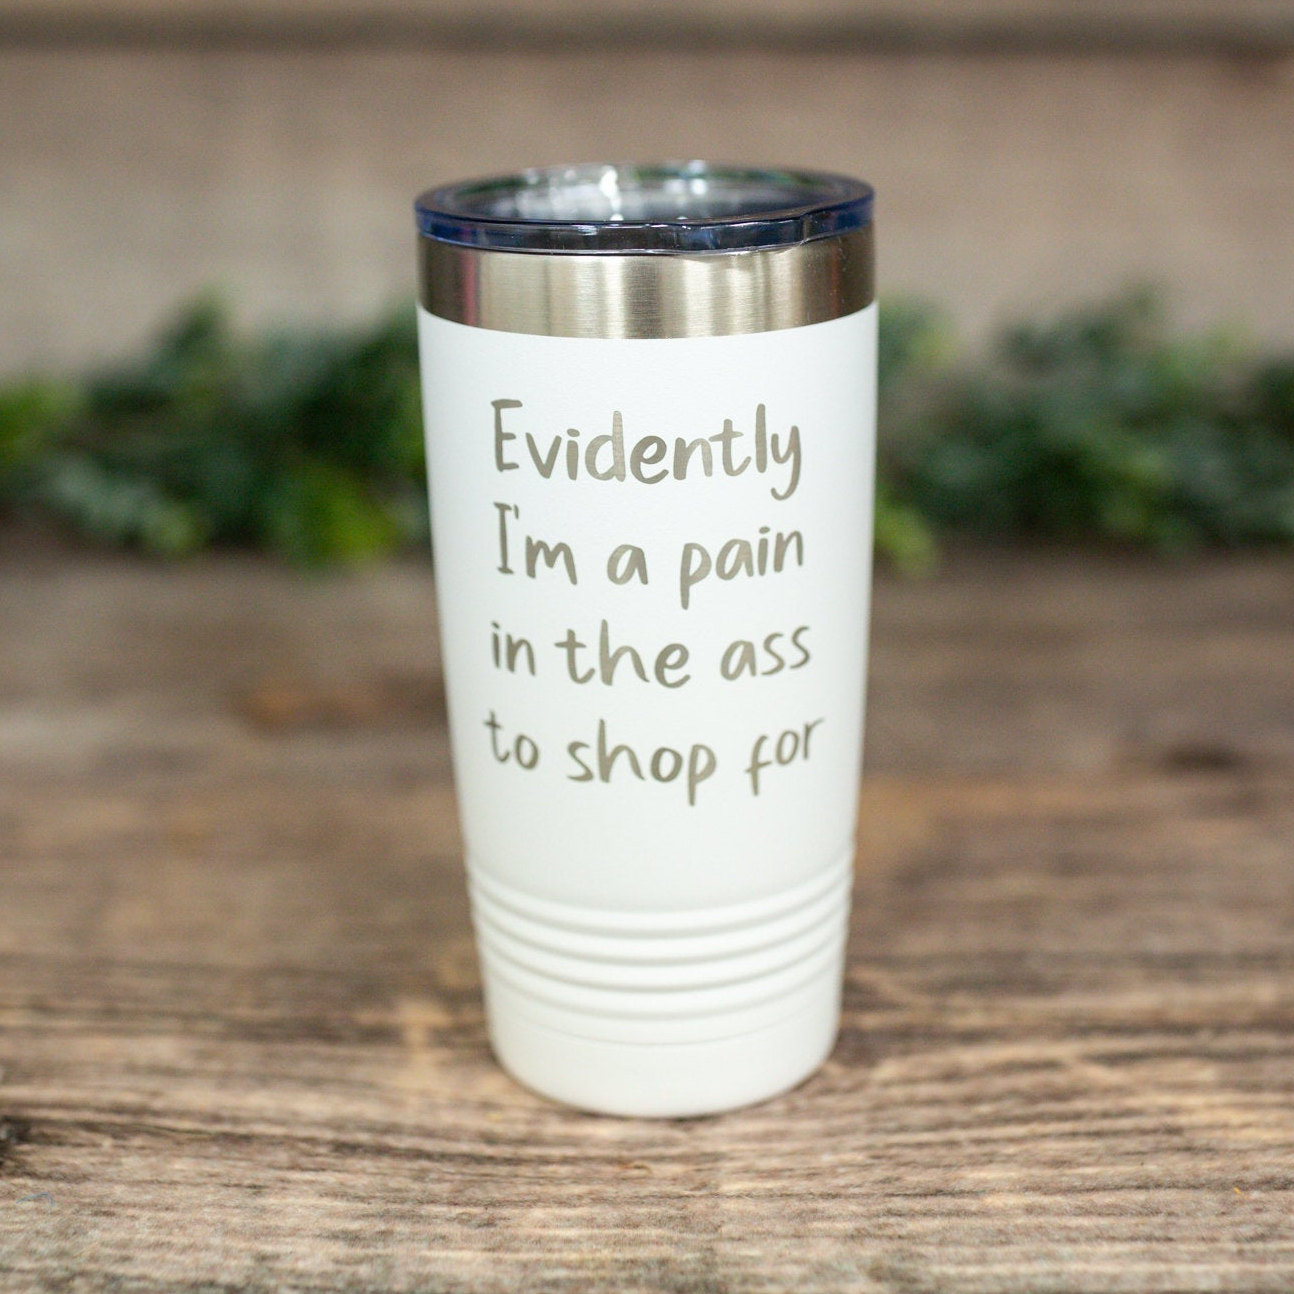 https://3cetching.com/wp-content/uploads/2021/07/evidently-im-a-pain-in-the-ass-to-shop-for-mature-engraved-stainless-tumbler-funny-gift-best-friend-gift-mug-60f763ea.jpg